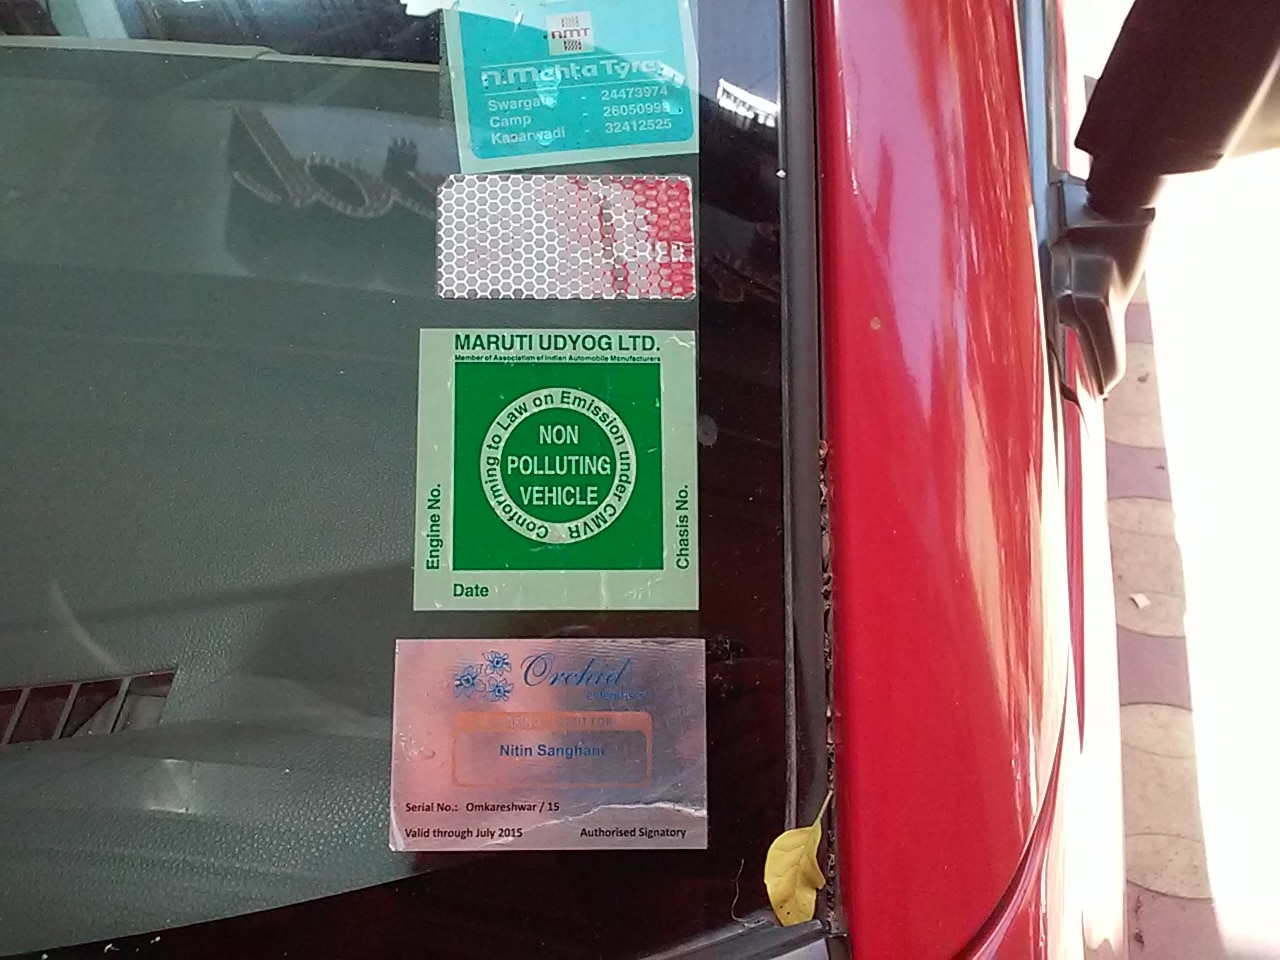 Parking stickers and permits pasted from behind the windscreen